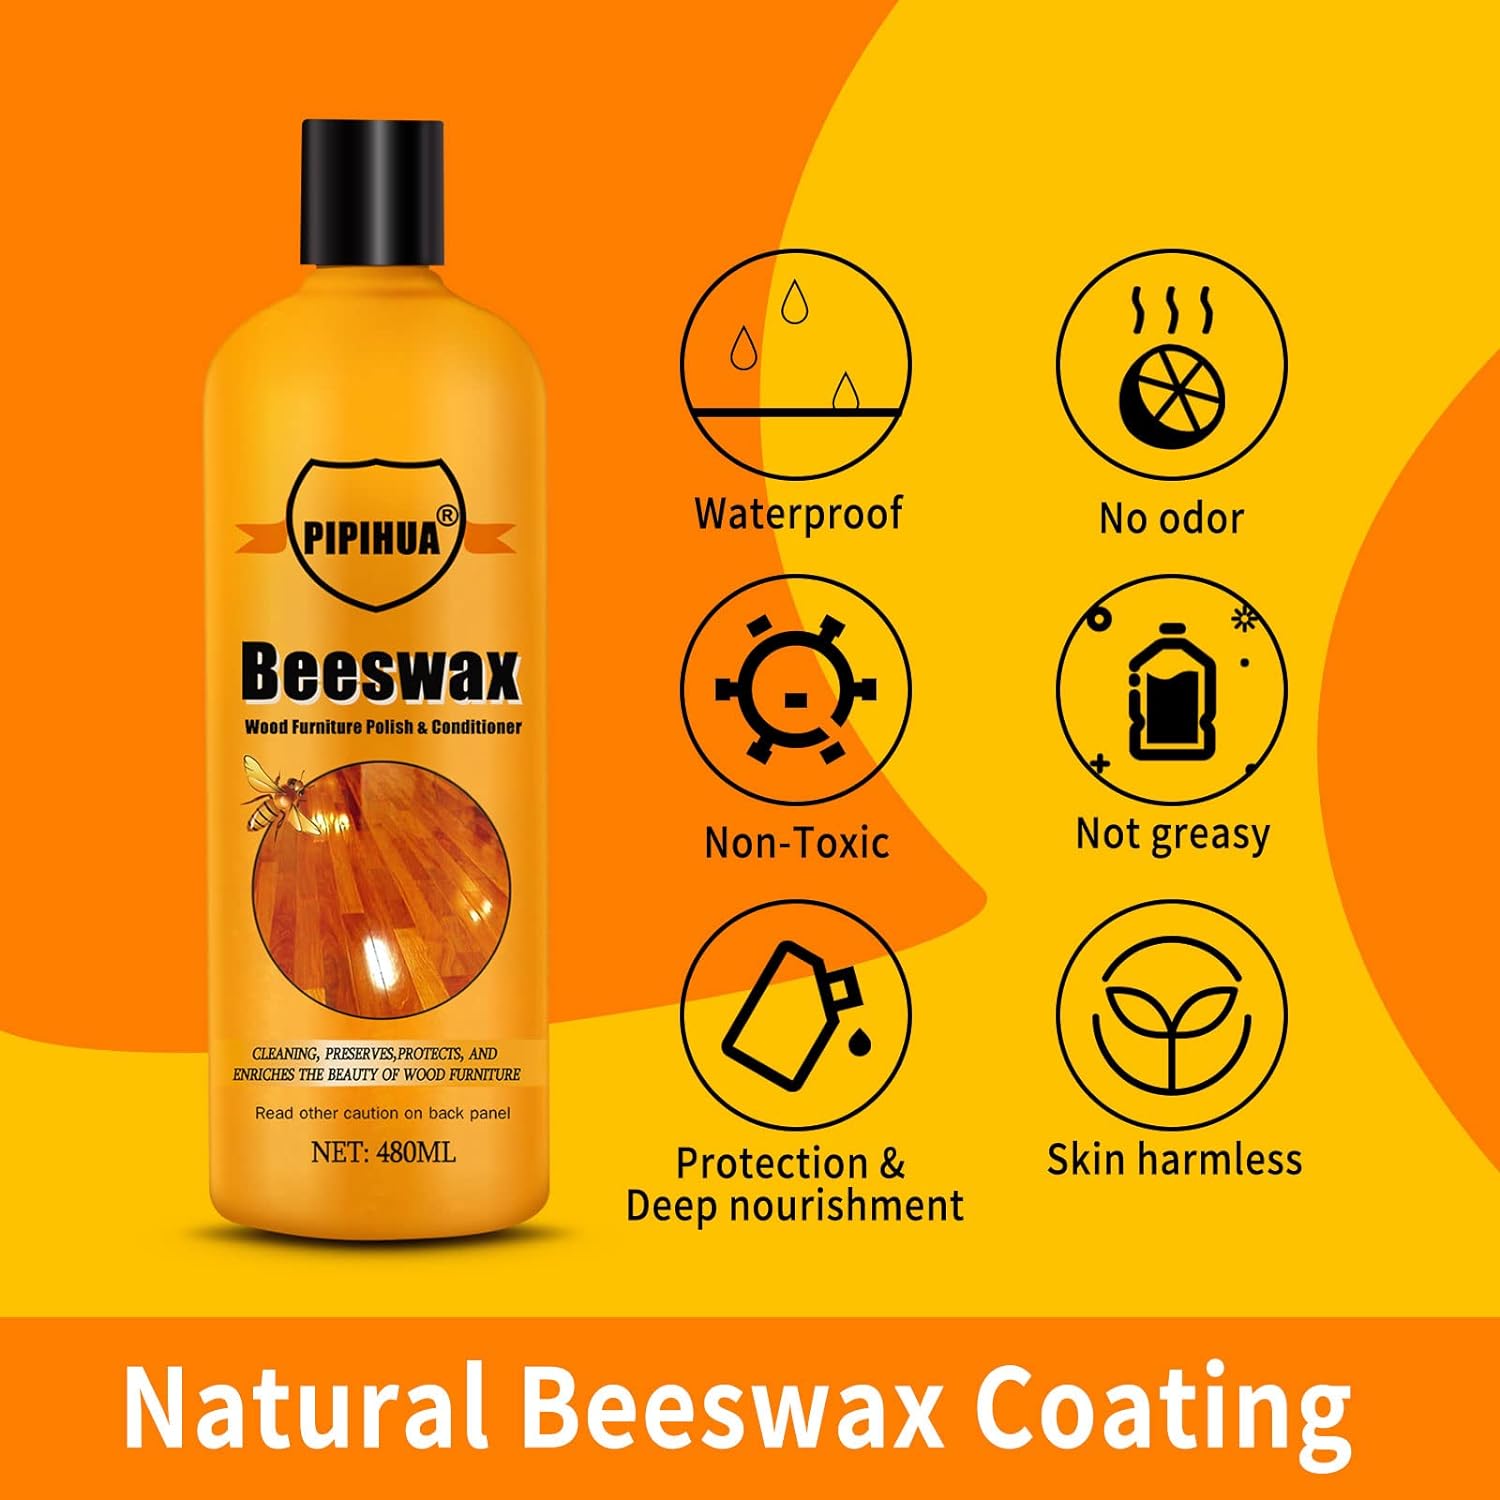 PIPIHUA Beeswax Furniture Wood Polish & Conditioner-Wood Seasoning Beeswax Oil for Wood Cleaner and Polish Furniture, 16.23 Fl Oz : Health & Household